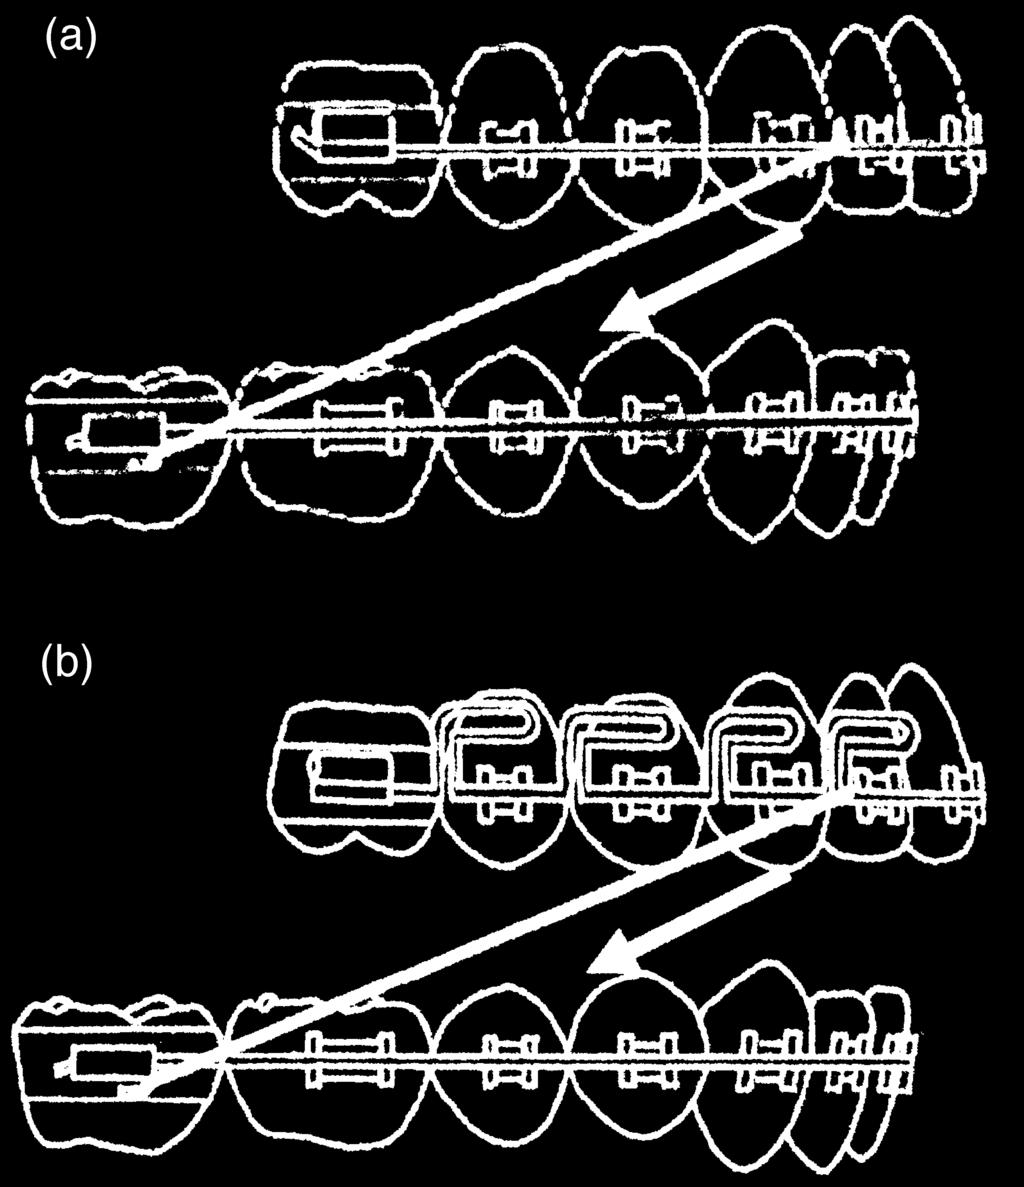 MOVEMENT OF THE MAXILLARY TEETH BY THE MEAW 341 canine.